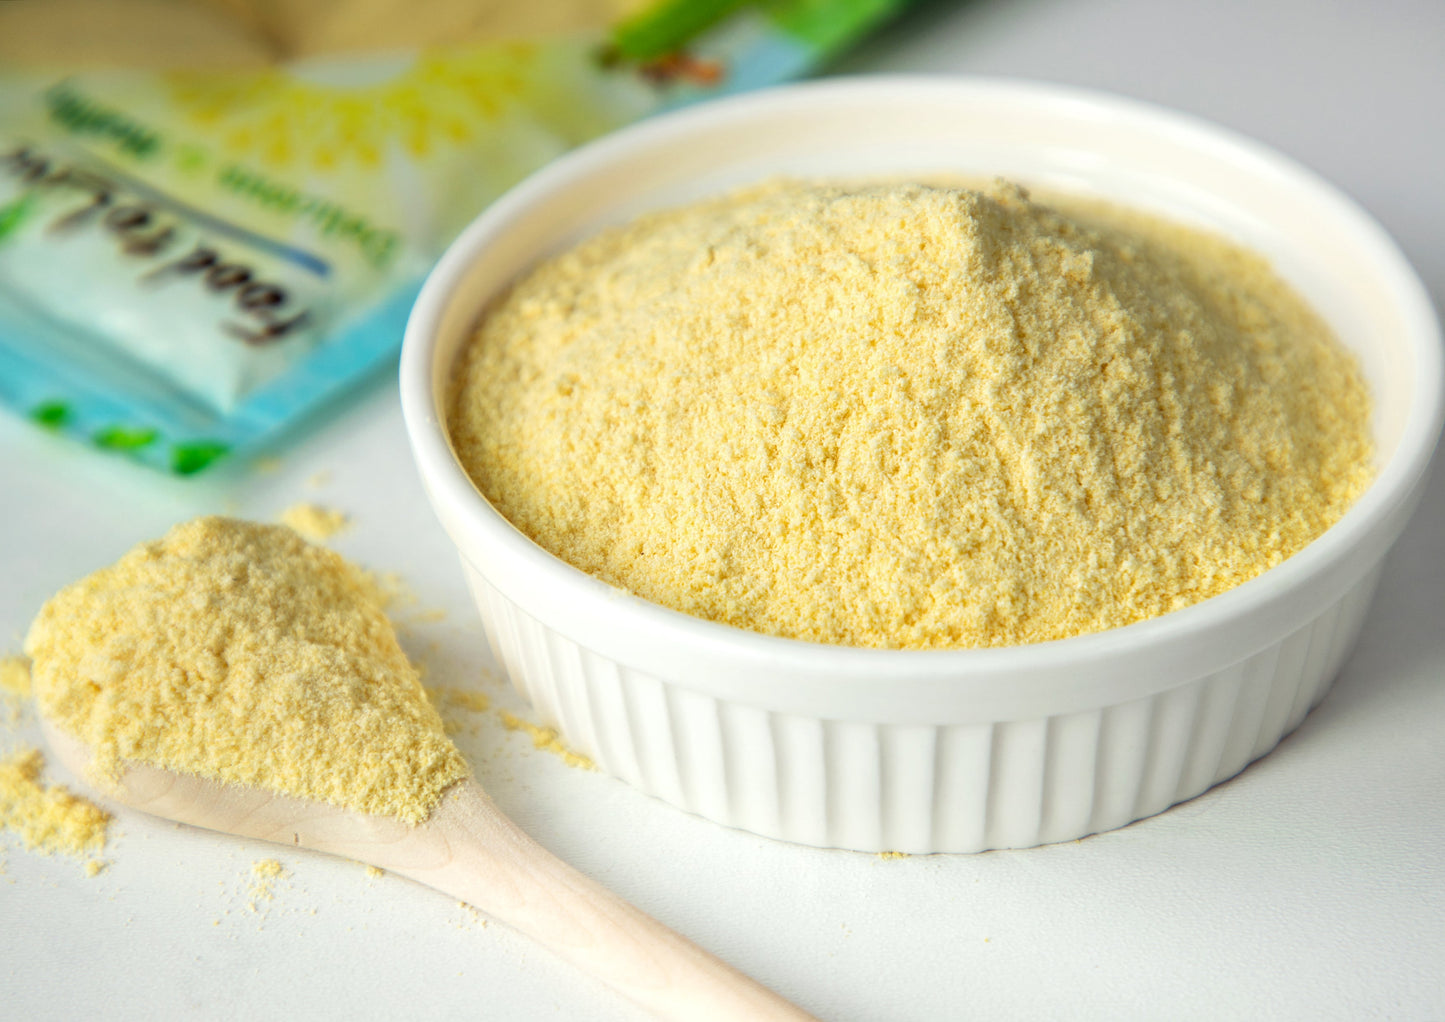 Organic Corn Flour - Non-GMO, Whole Grain, Finely Ground Meal, Vegan, Kosher, Bulk Yellow Milled Maize. Great for Cooking and Baking Cornbread, Pancakes, and Tortillas. Made in USA